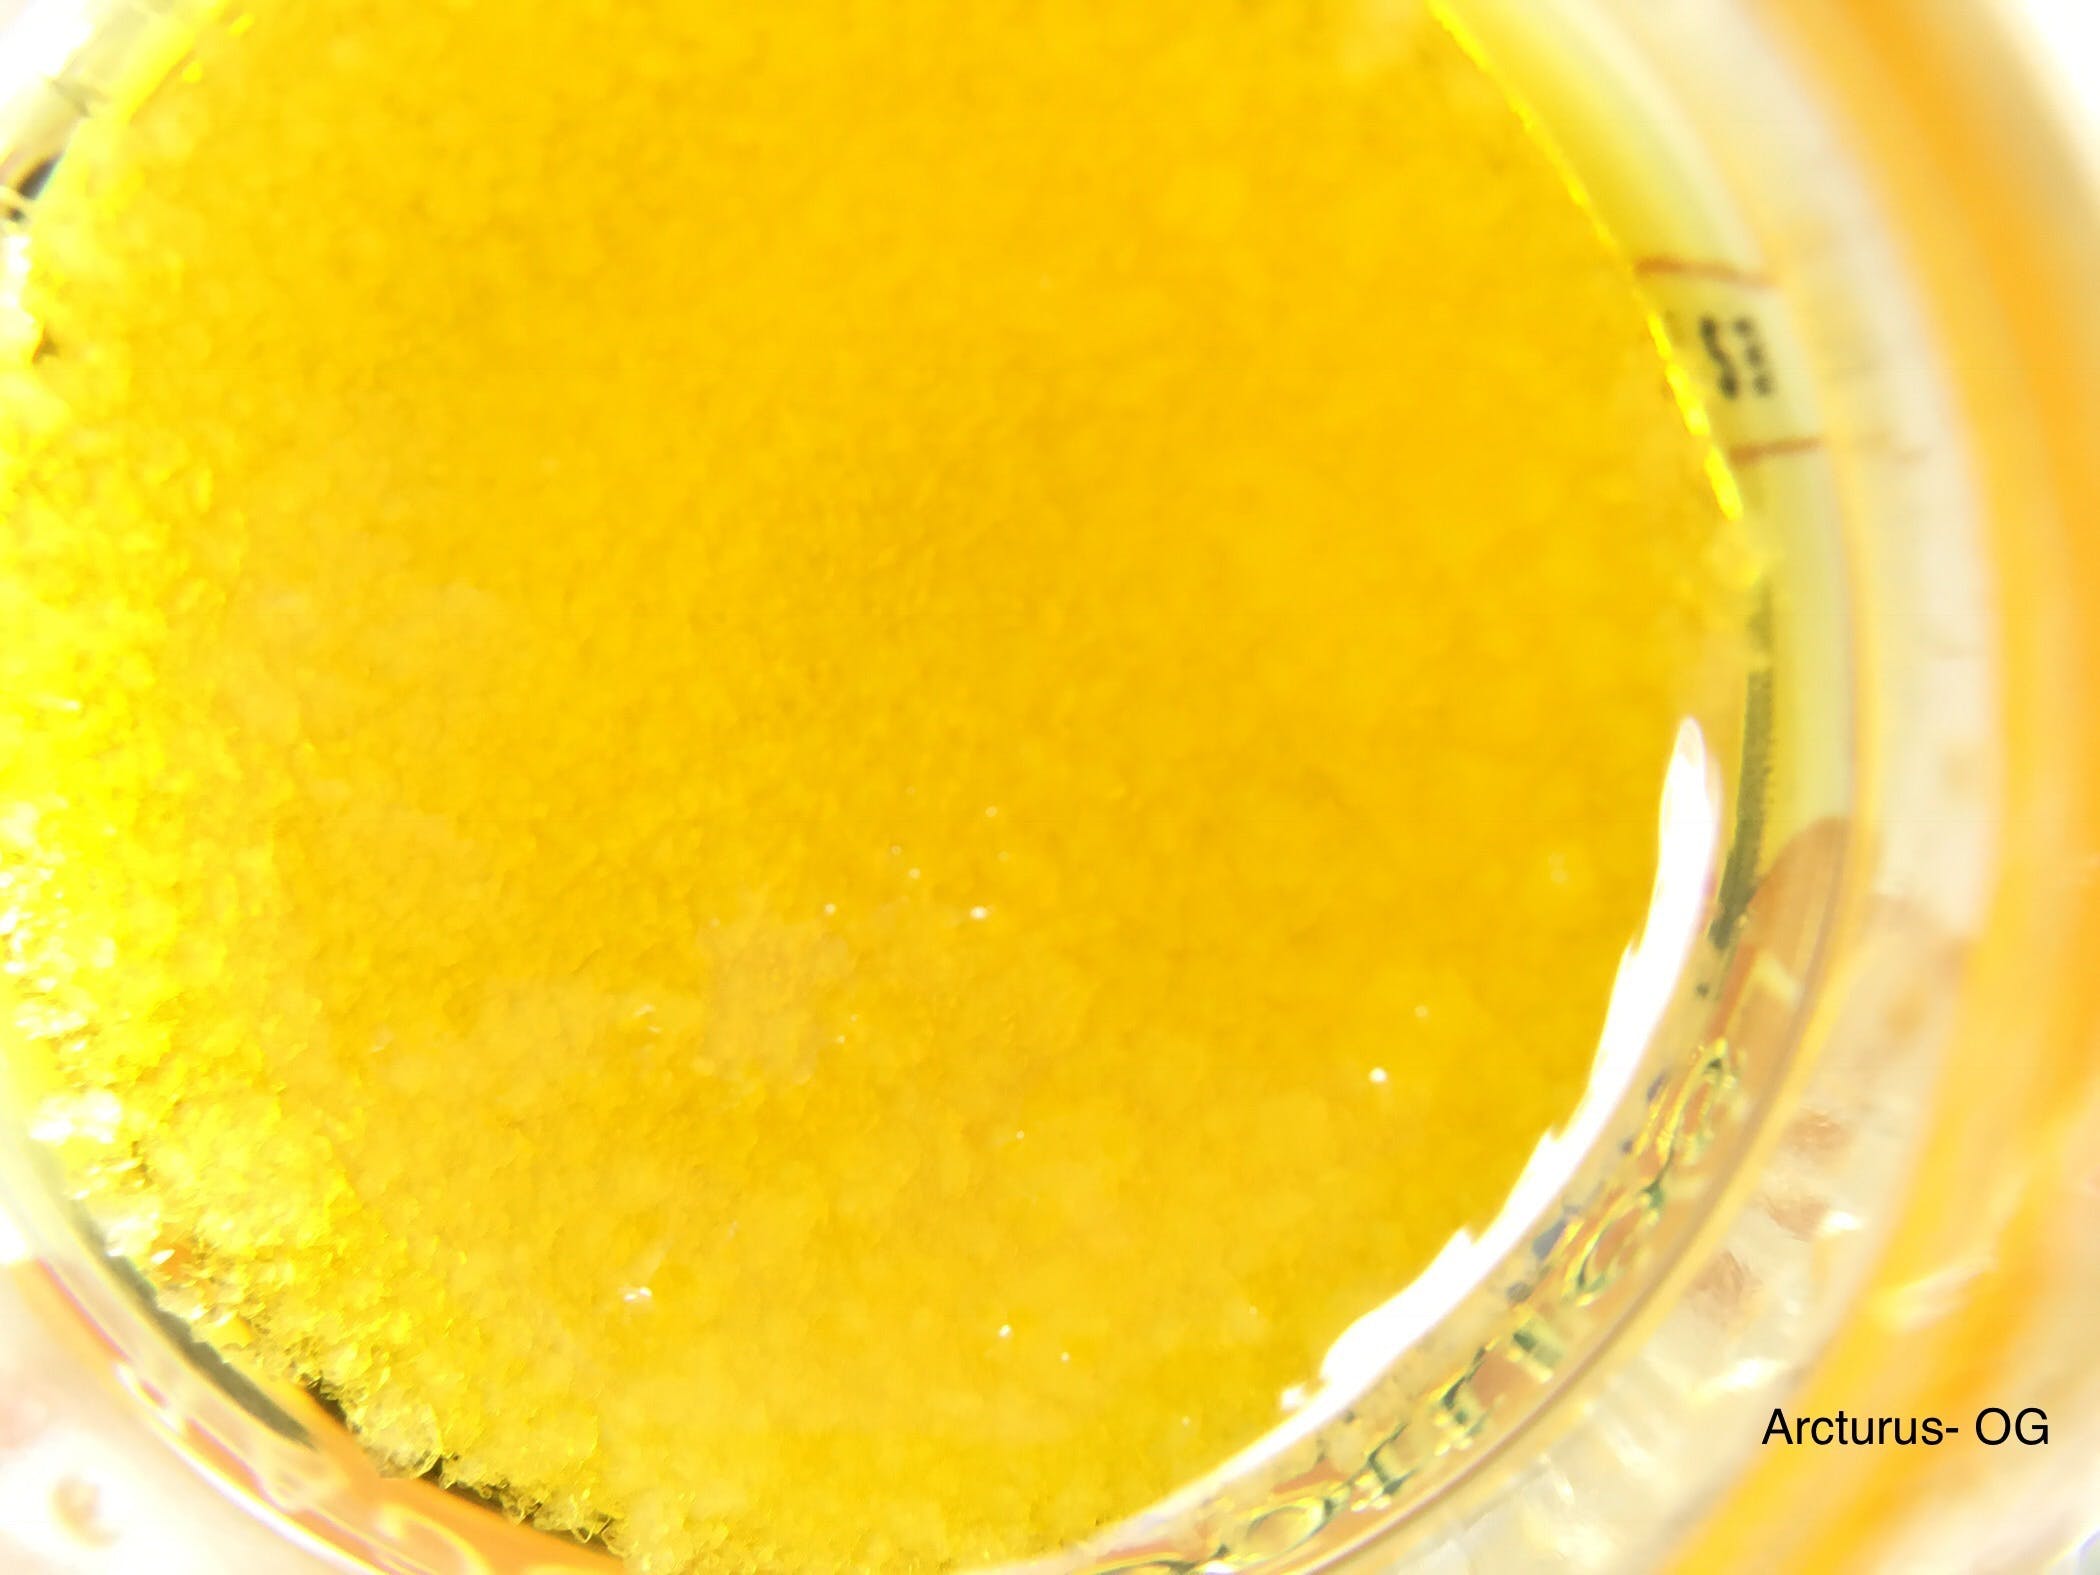 concentrate-arcturus-1g-sauce-og